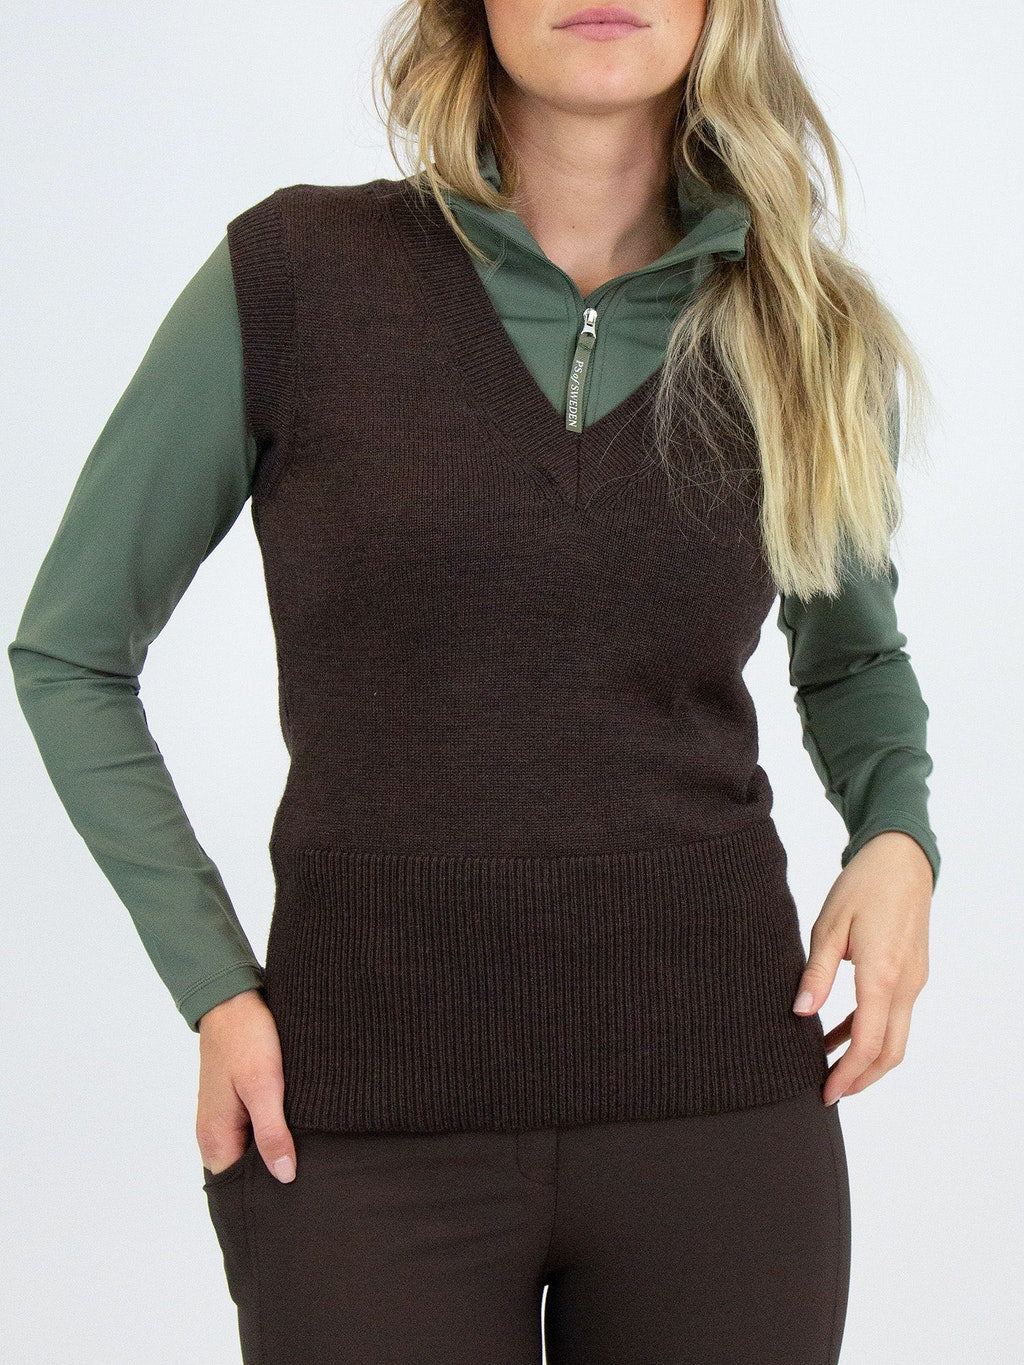 Mid-gauge knit vest made in responsibly produced merino wool blend. Rib-knitted tall collar with placket of large horn imitation buttons. 